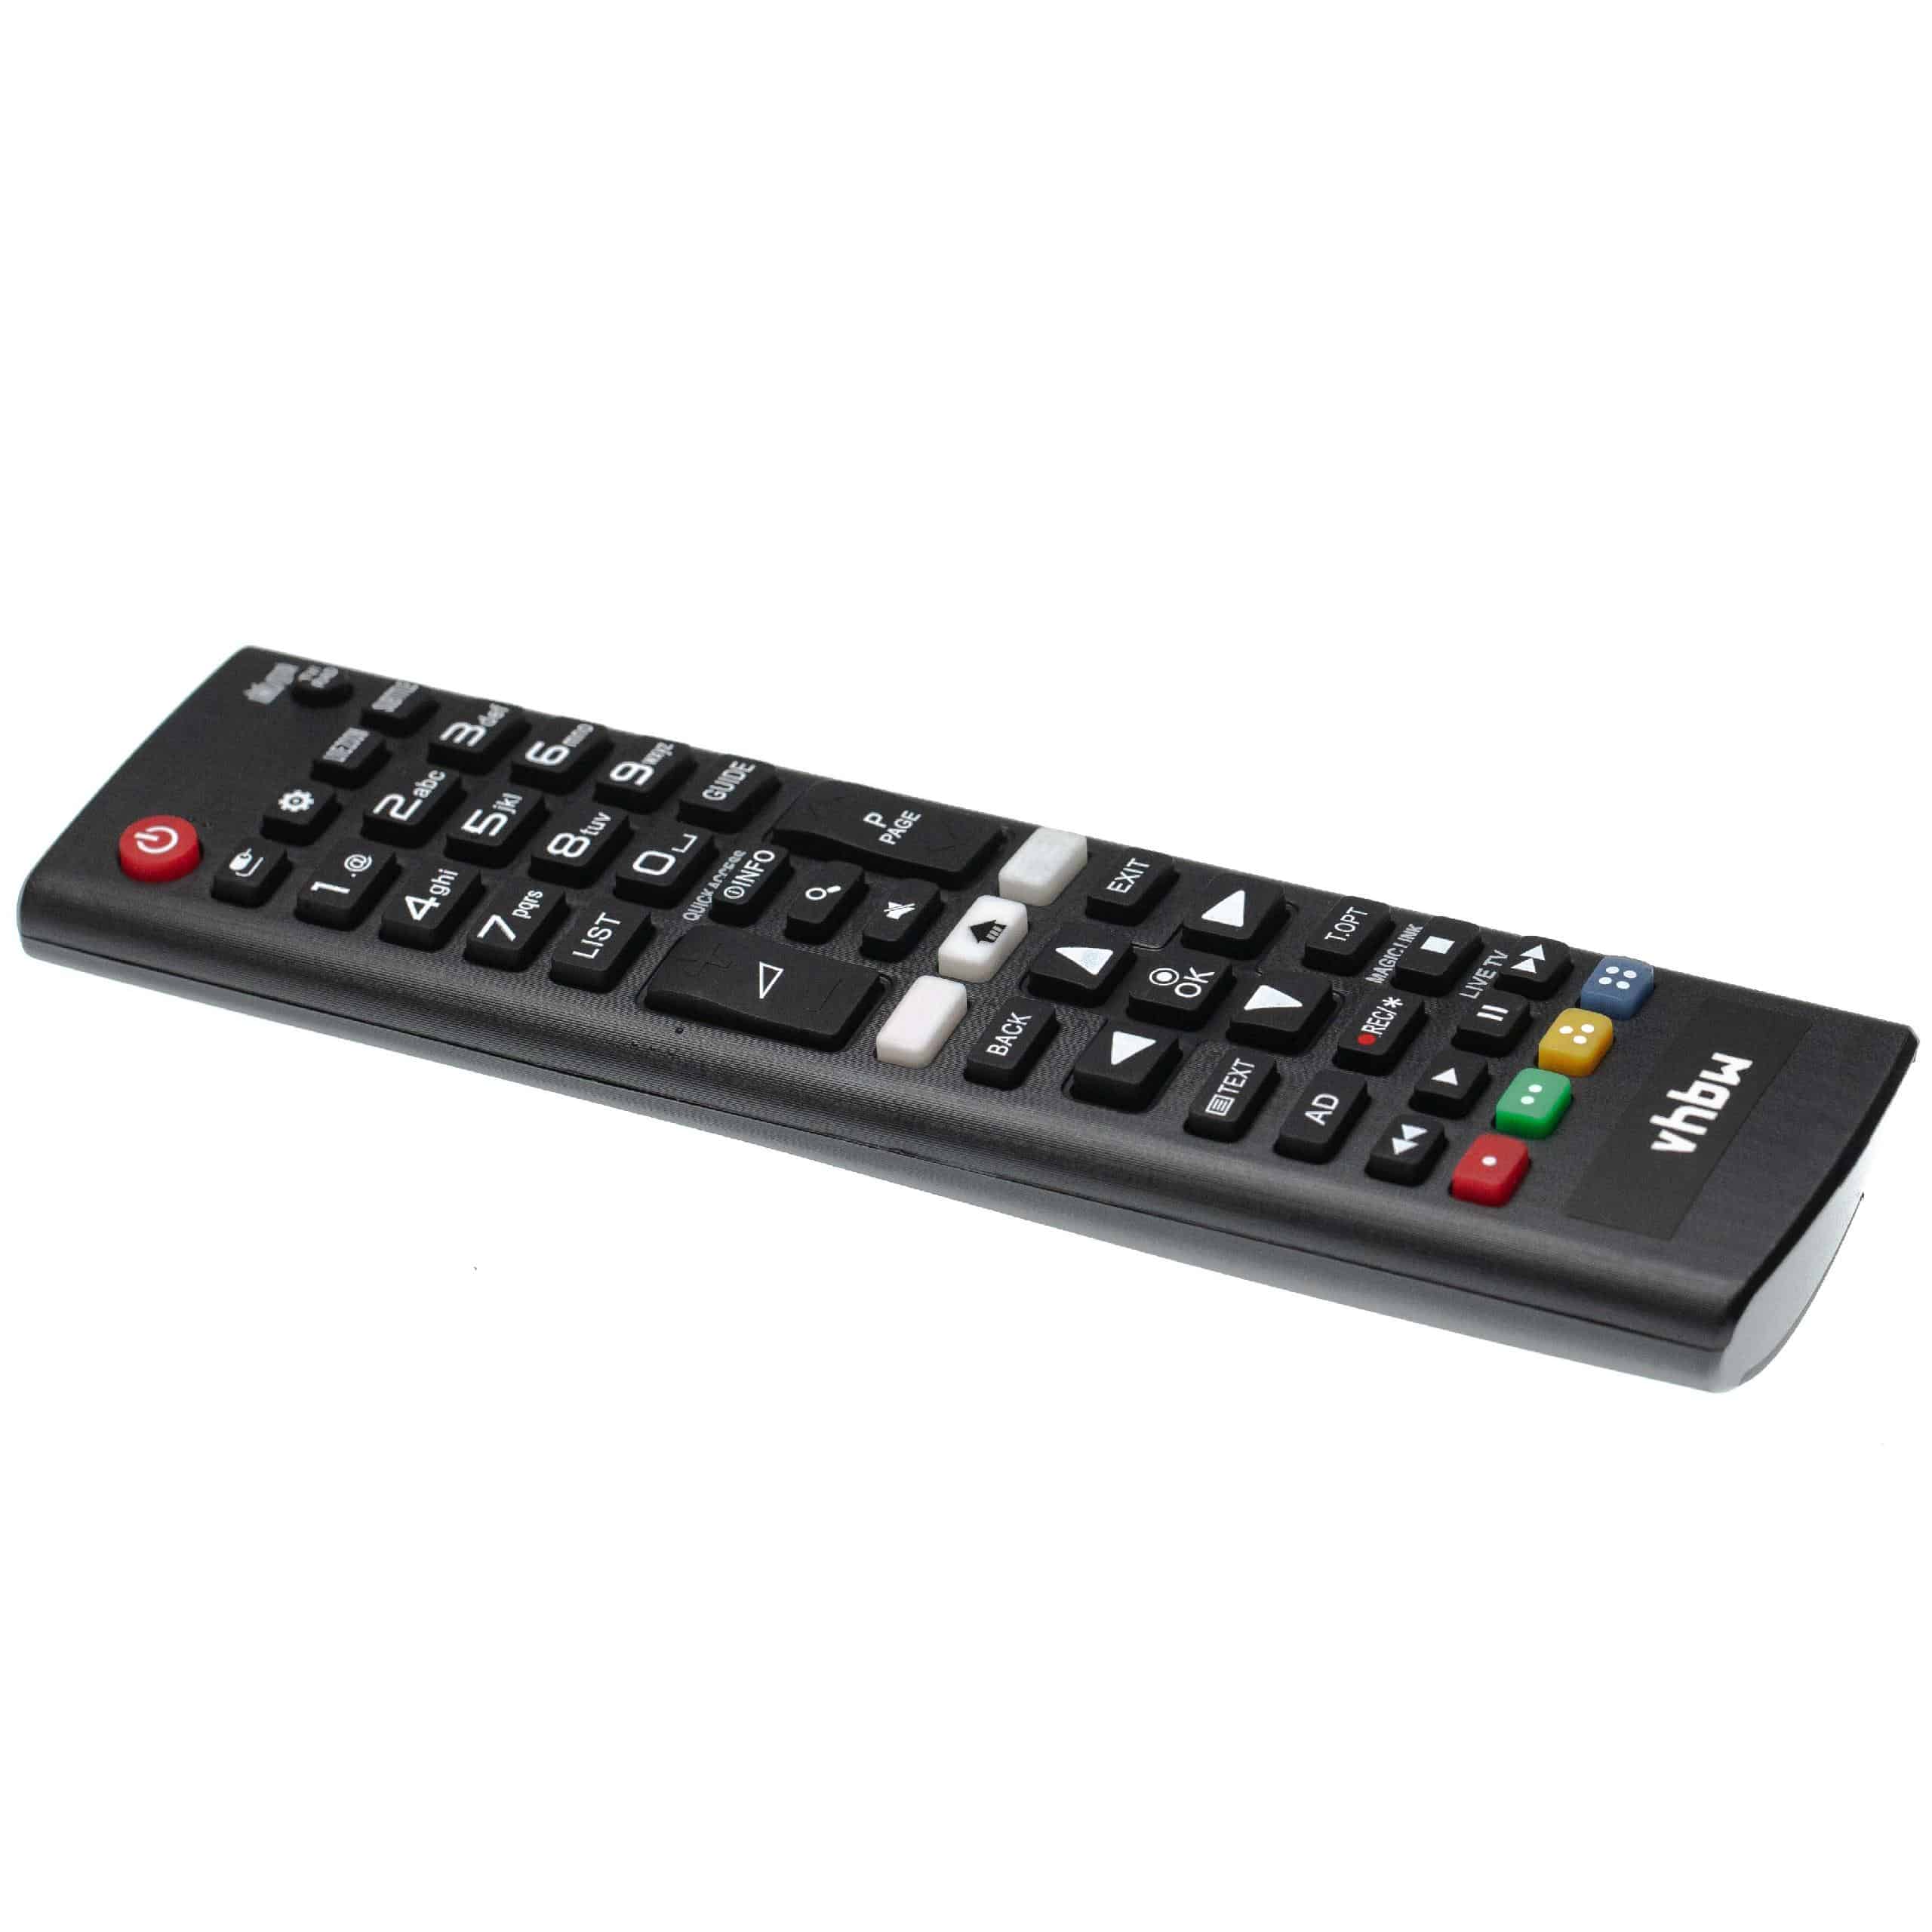 Remote Control replaces LG AKB75095308 for LG TV